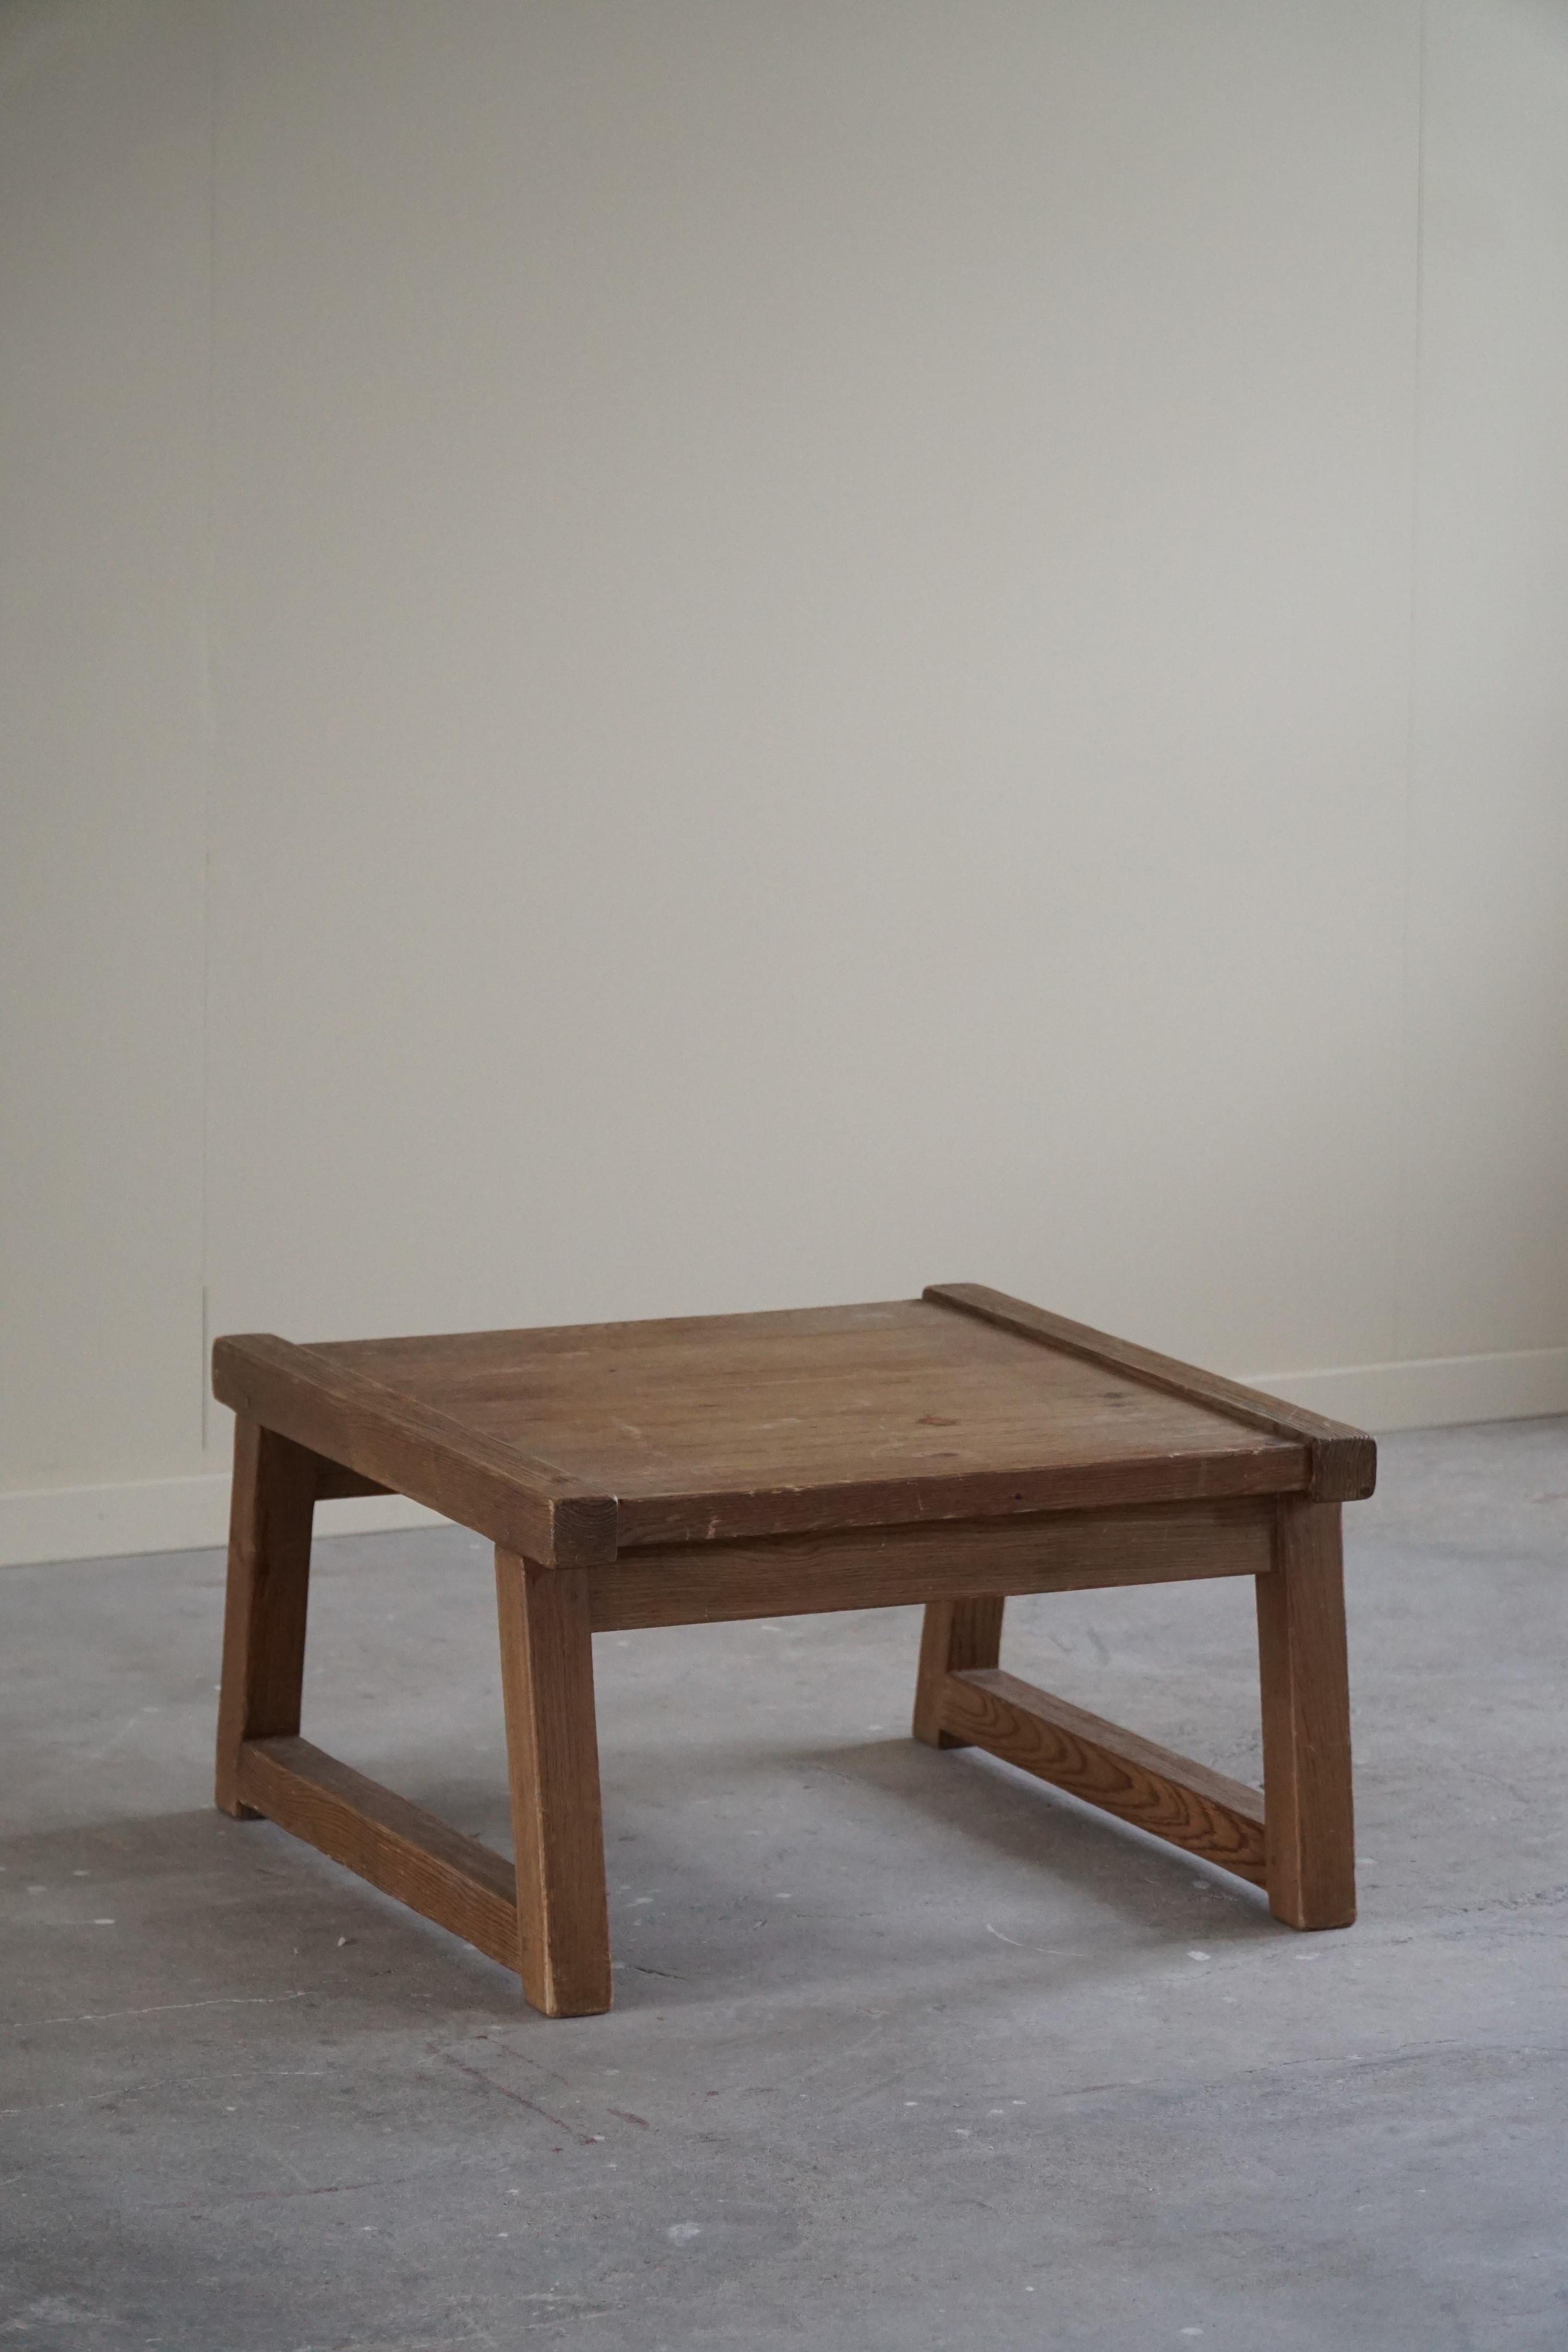 Danish Modern Brutalist Sofa Table / Side Table in Solid Pine, Midcentury, 1960 For Sale 2